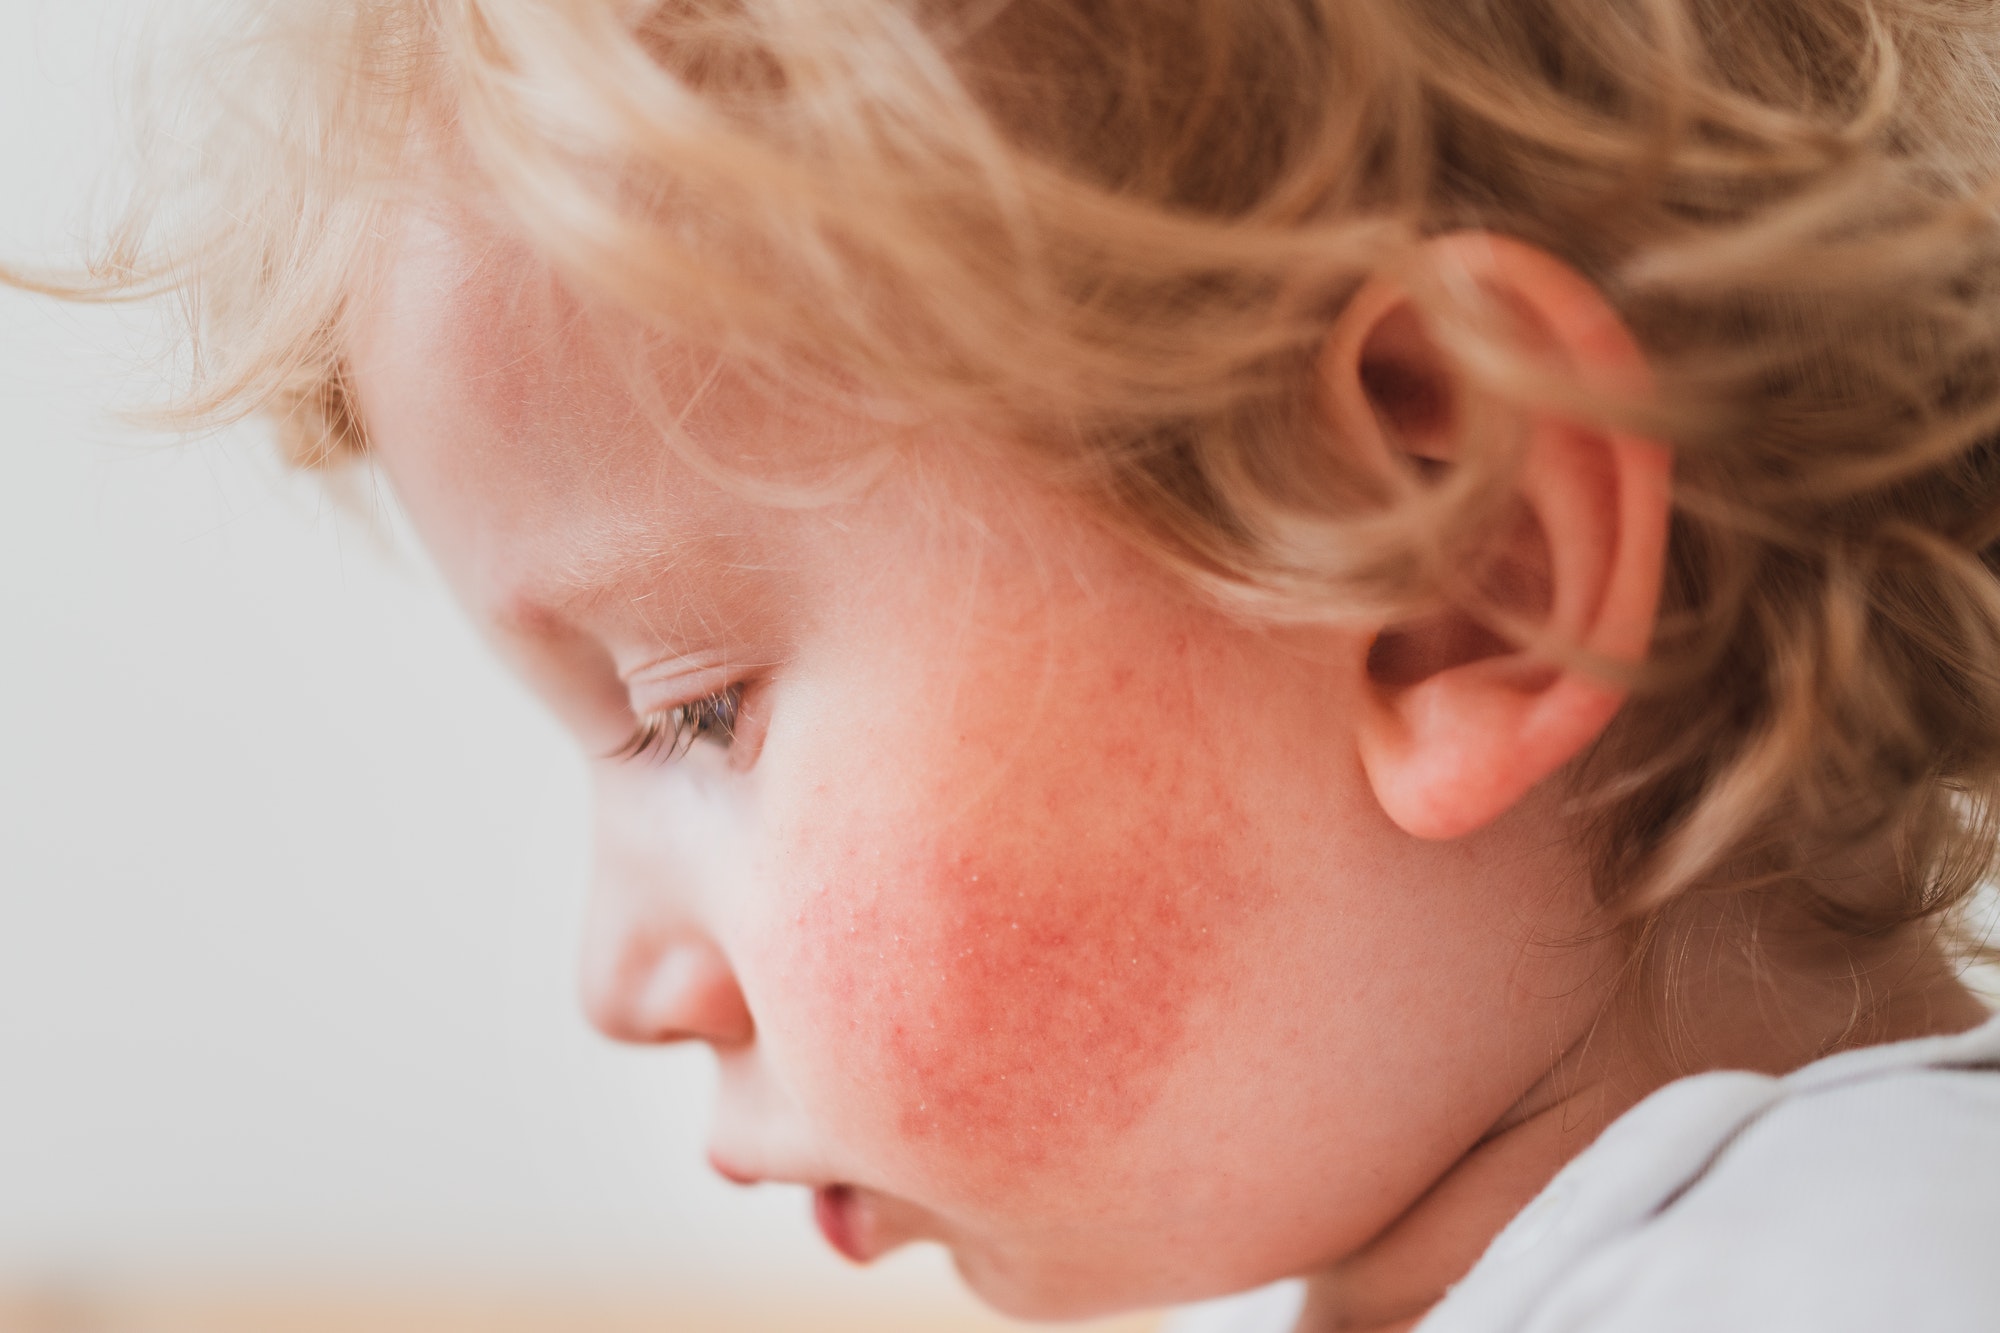 food allergies, eczema, or diathesis in a small child on the cheeks